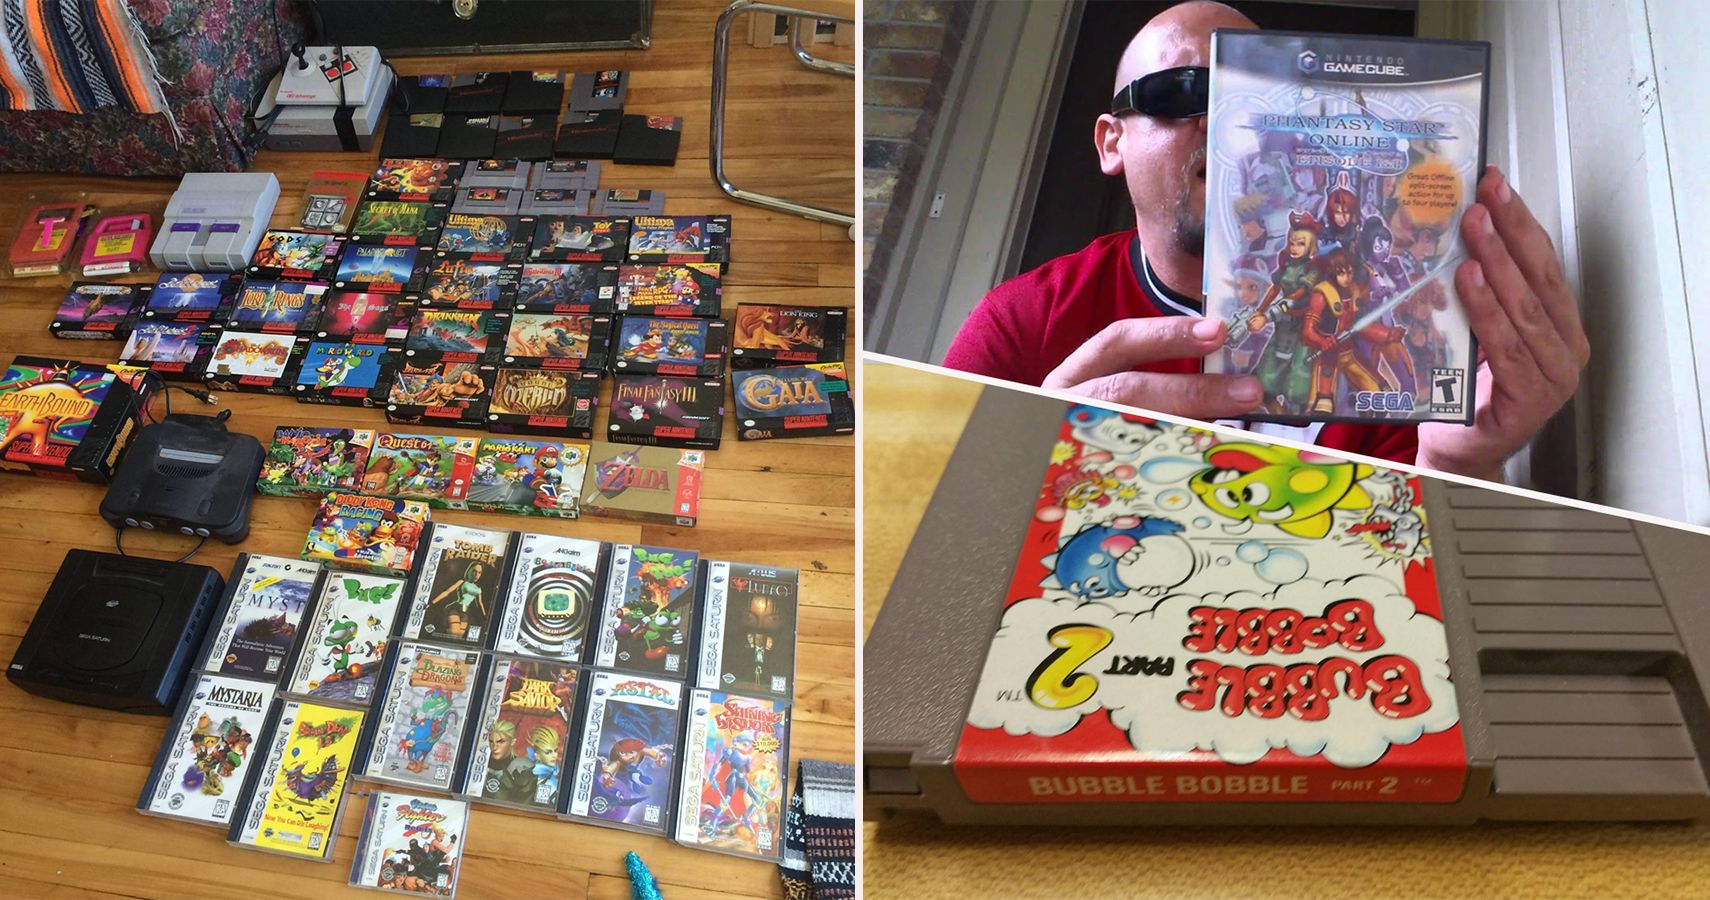 25 Valuable Video Game Garage Sale Finds That Barely Cost Anything (And  Their Worth)